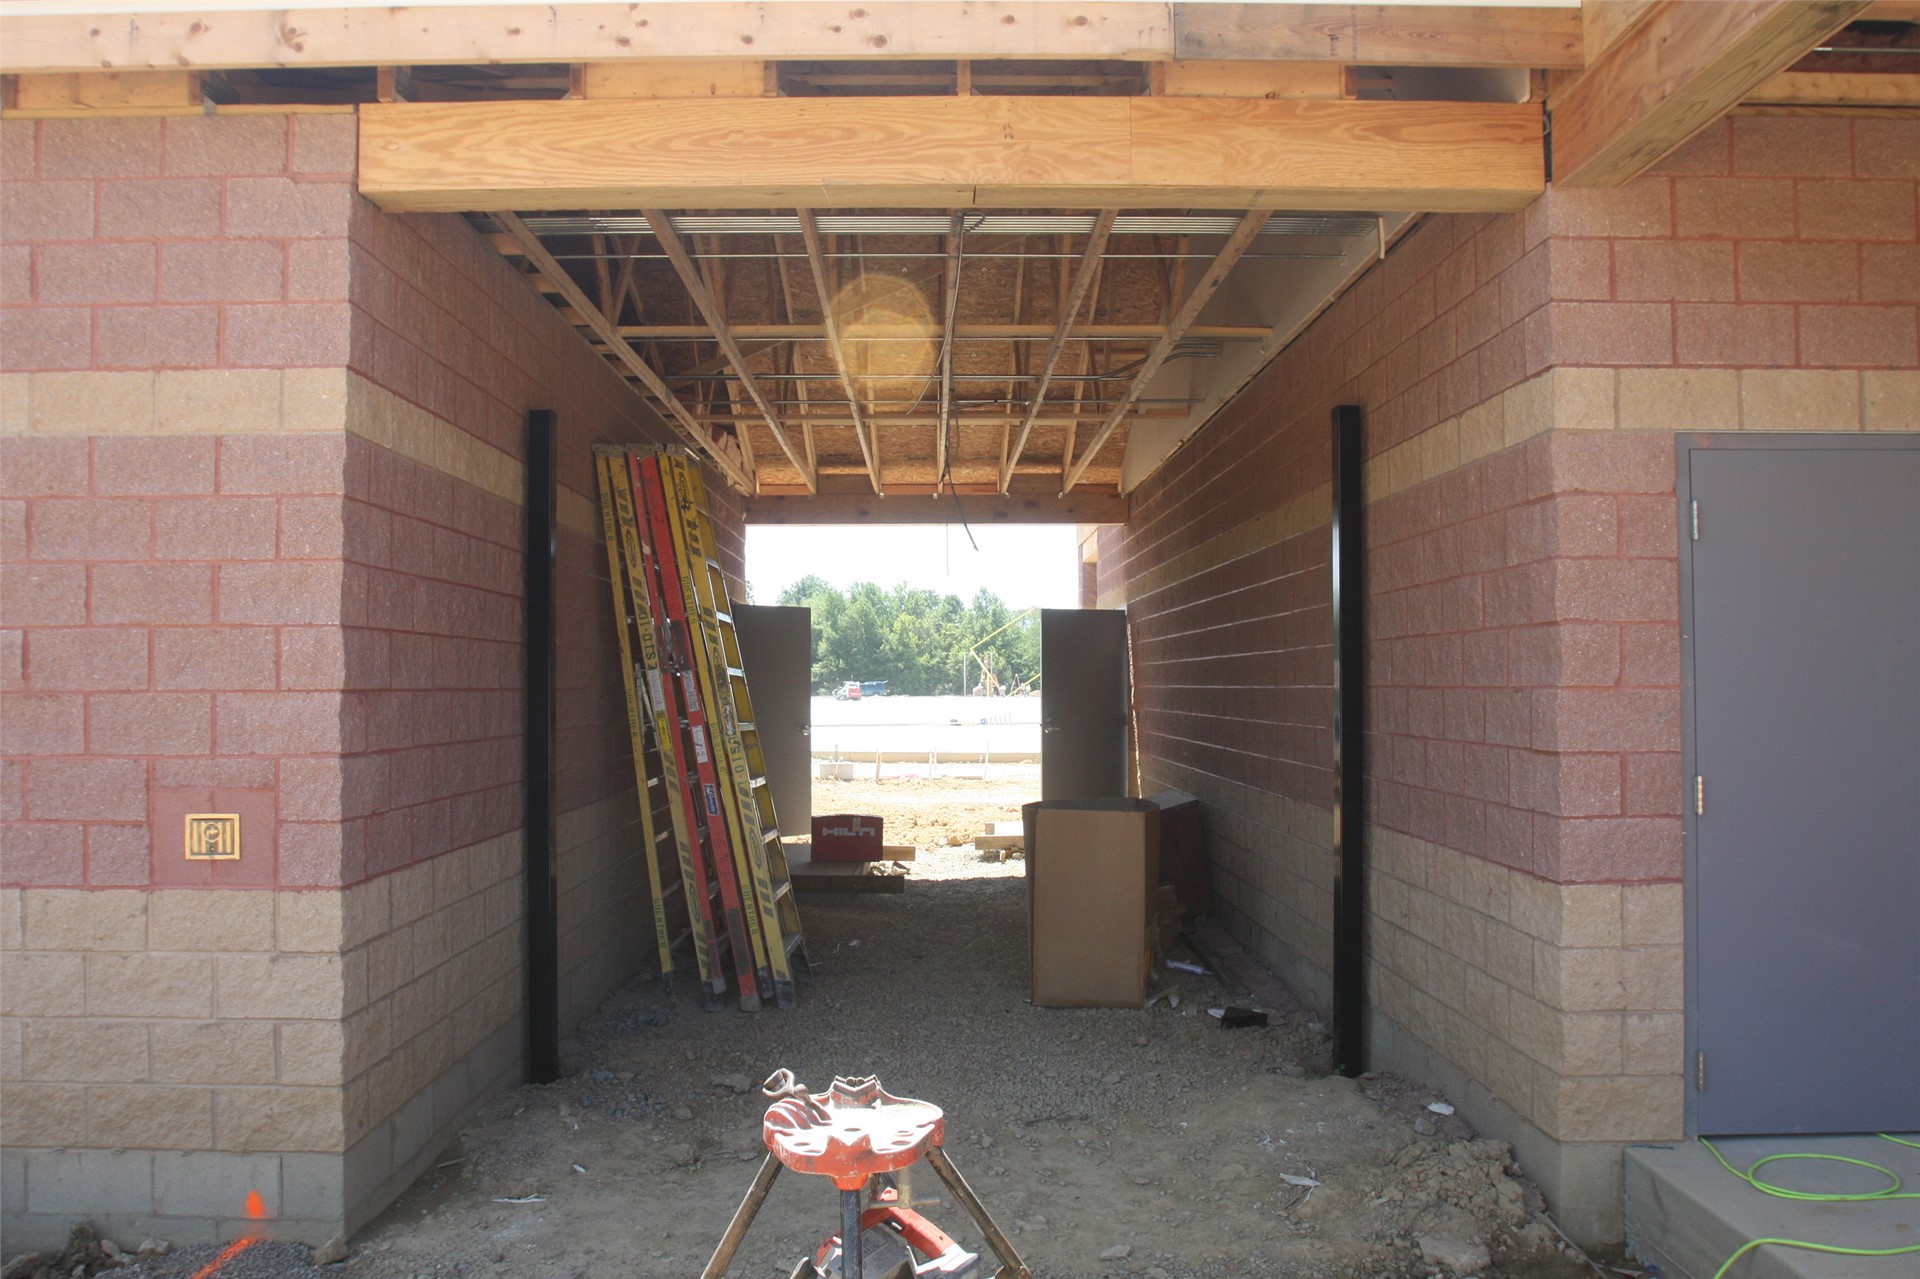 The east tunnel leading into the stadium from the parking lot